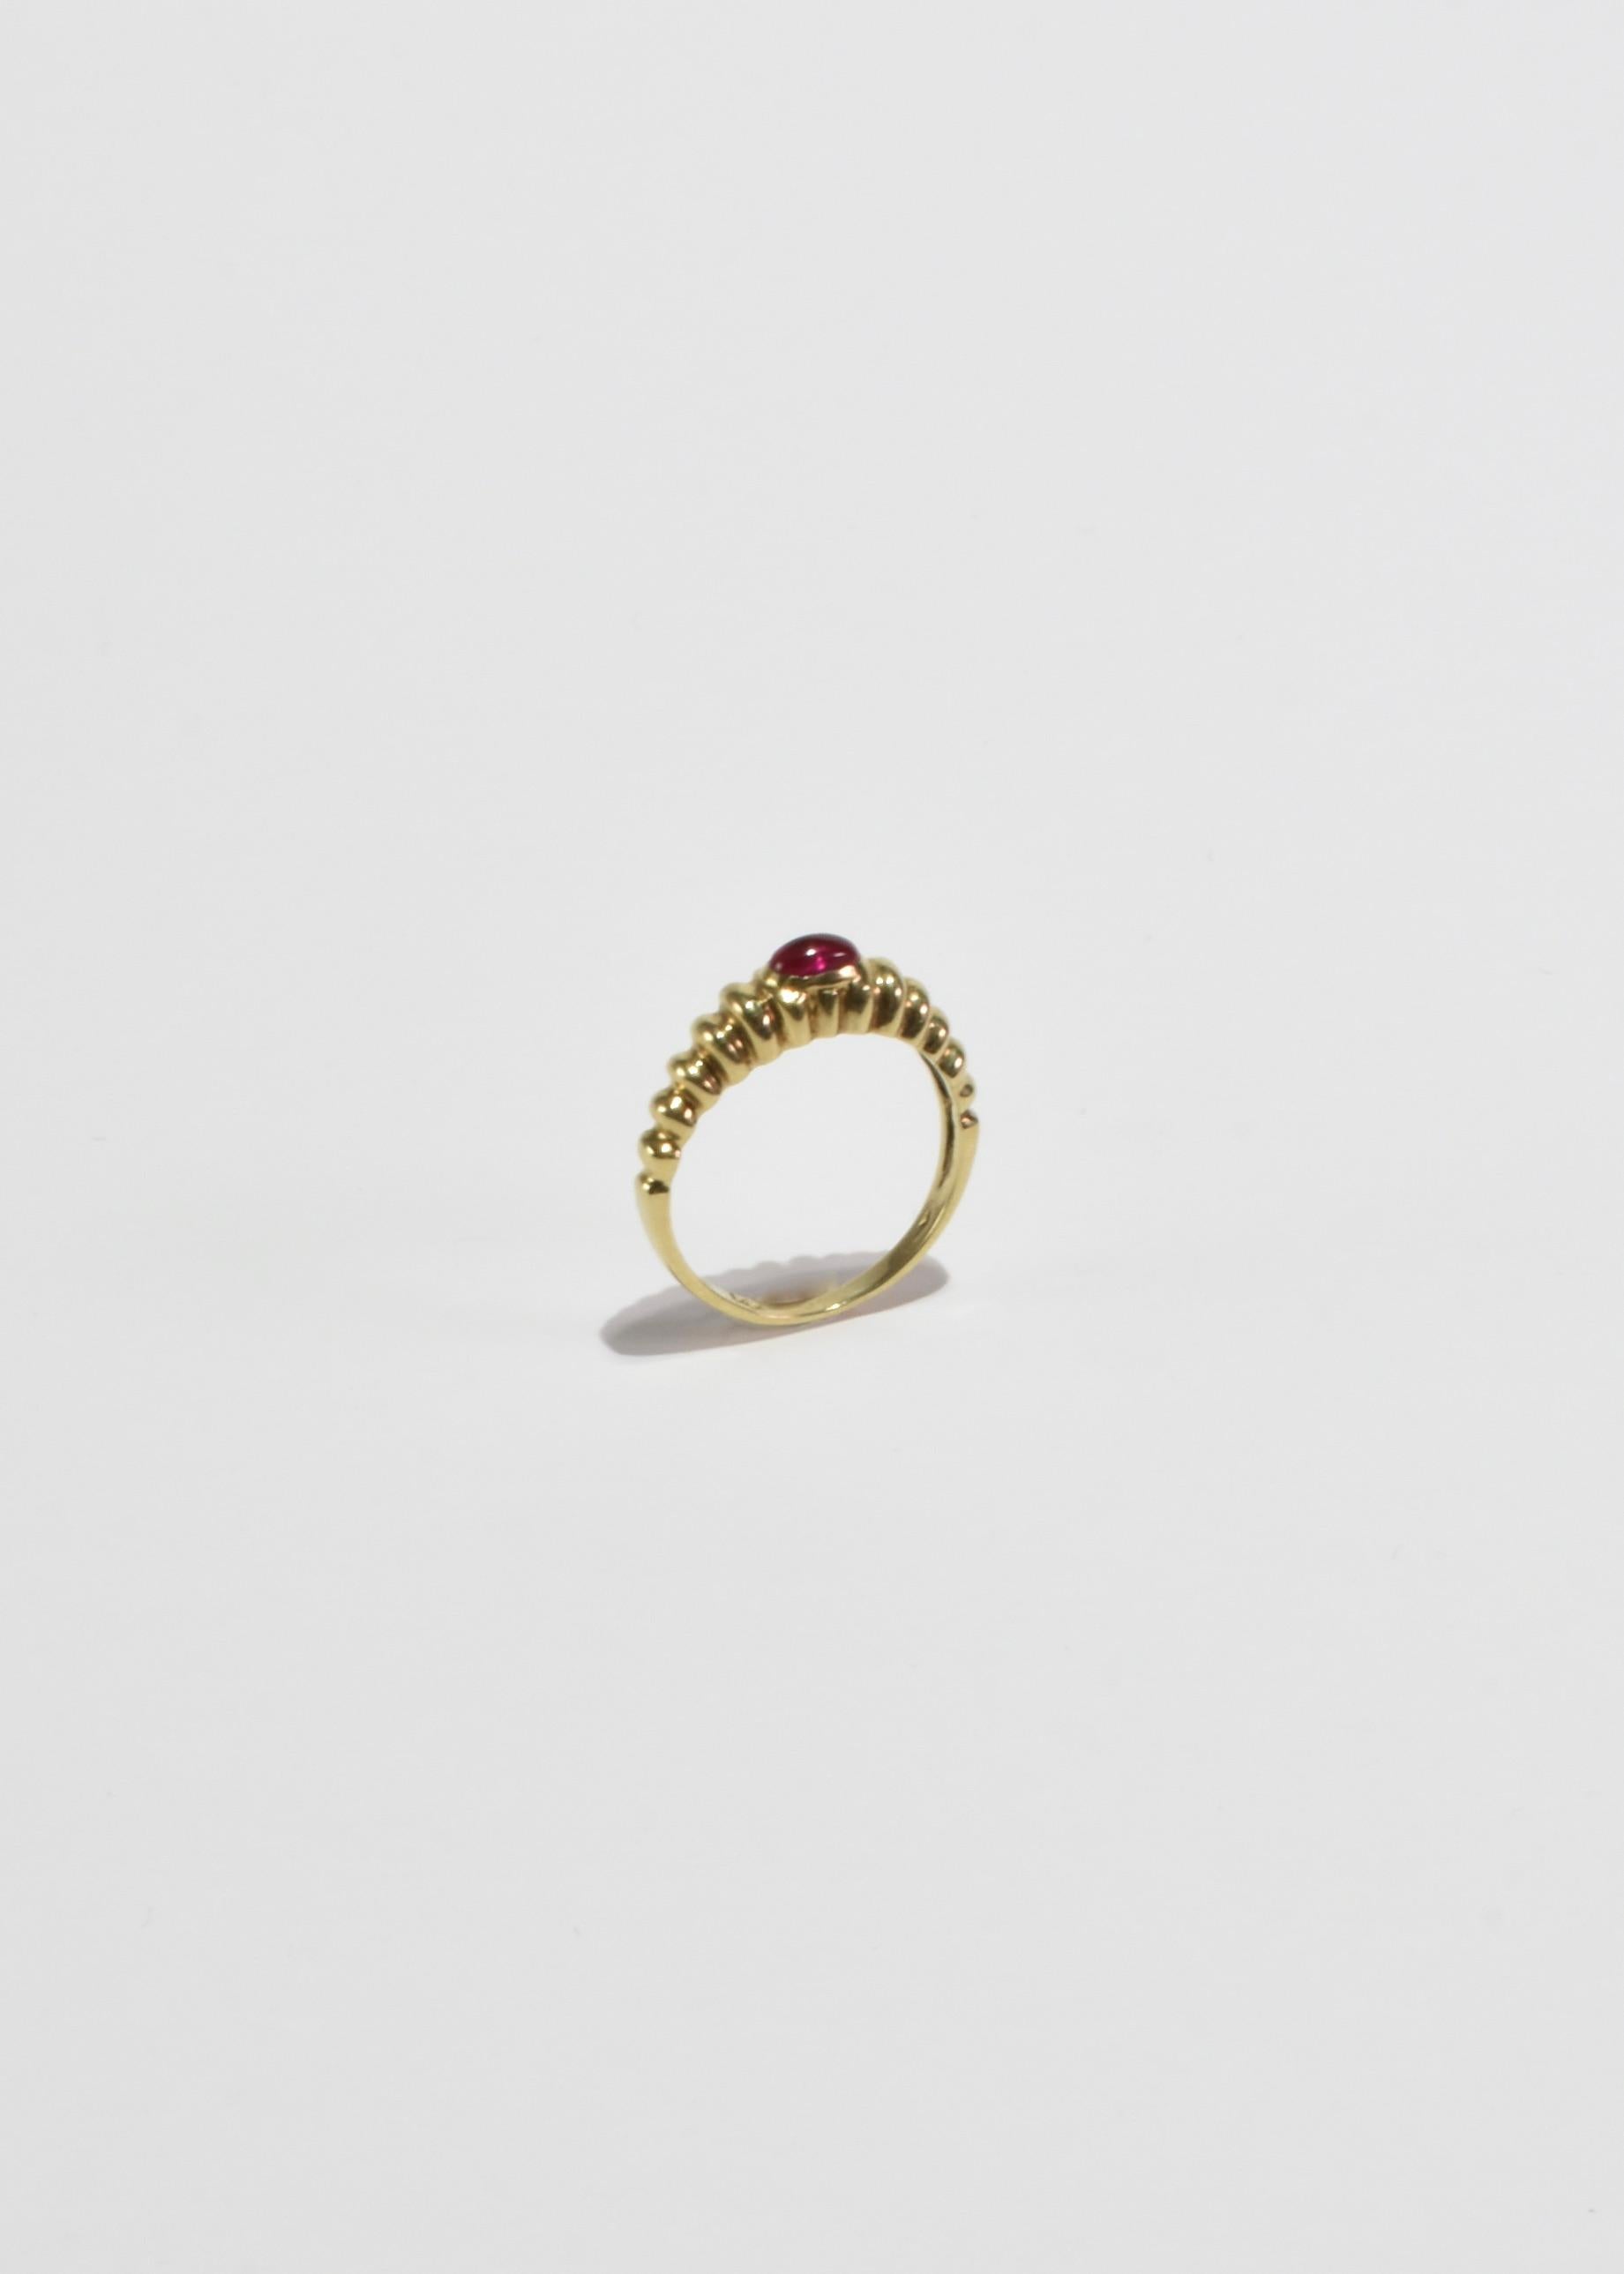 Gold Ribbed Ruby Ring In Good Condition For Sale In Richmond, VA